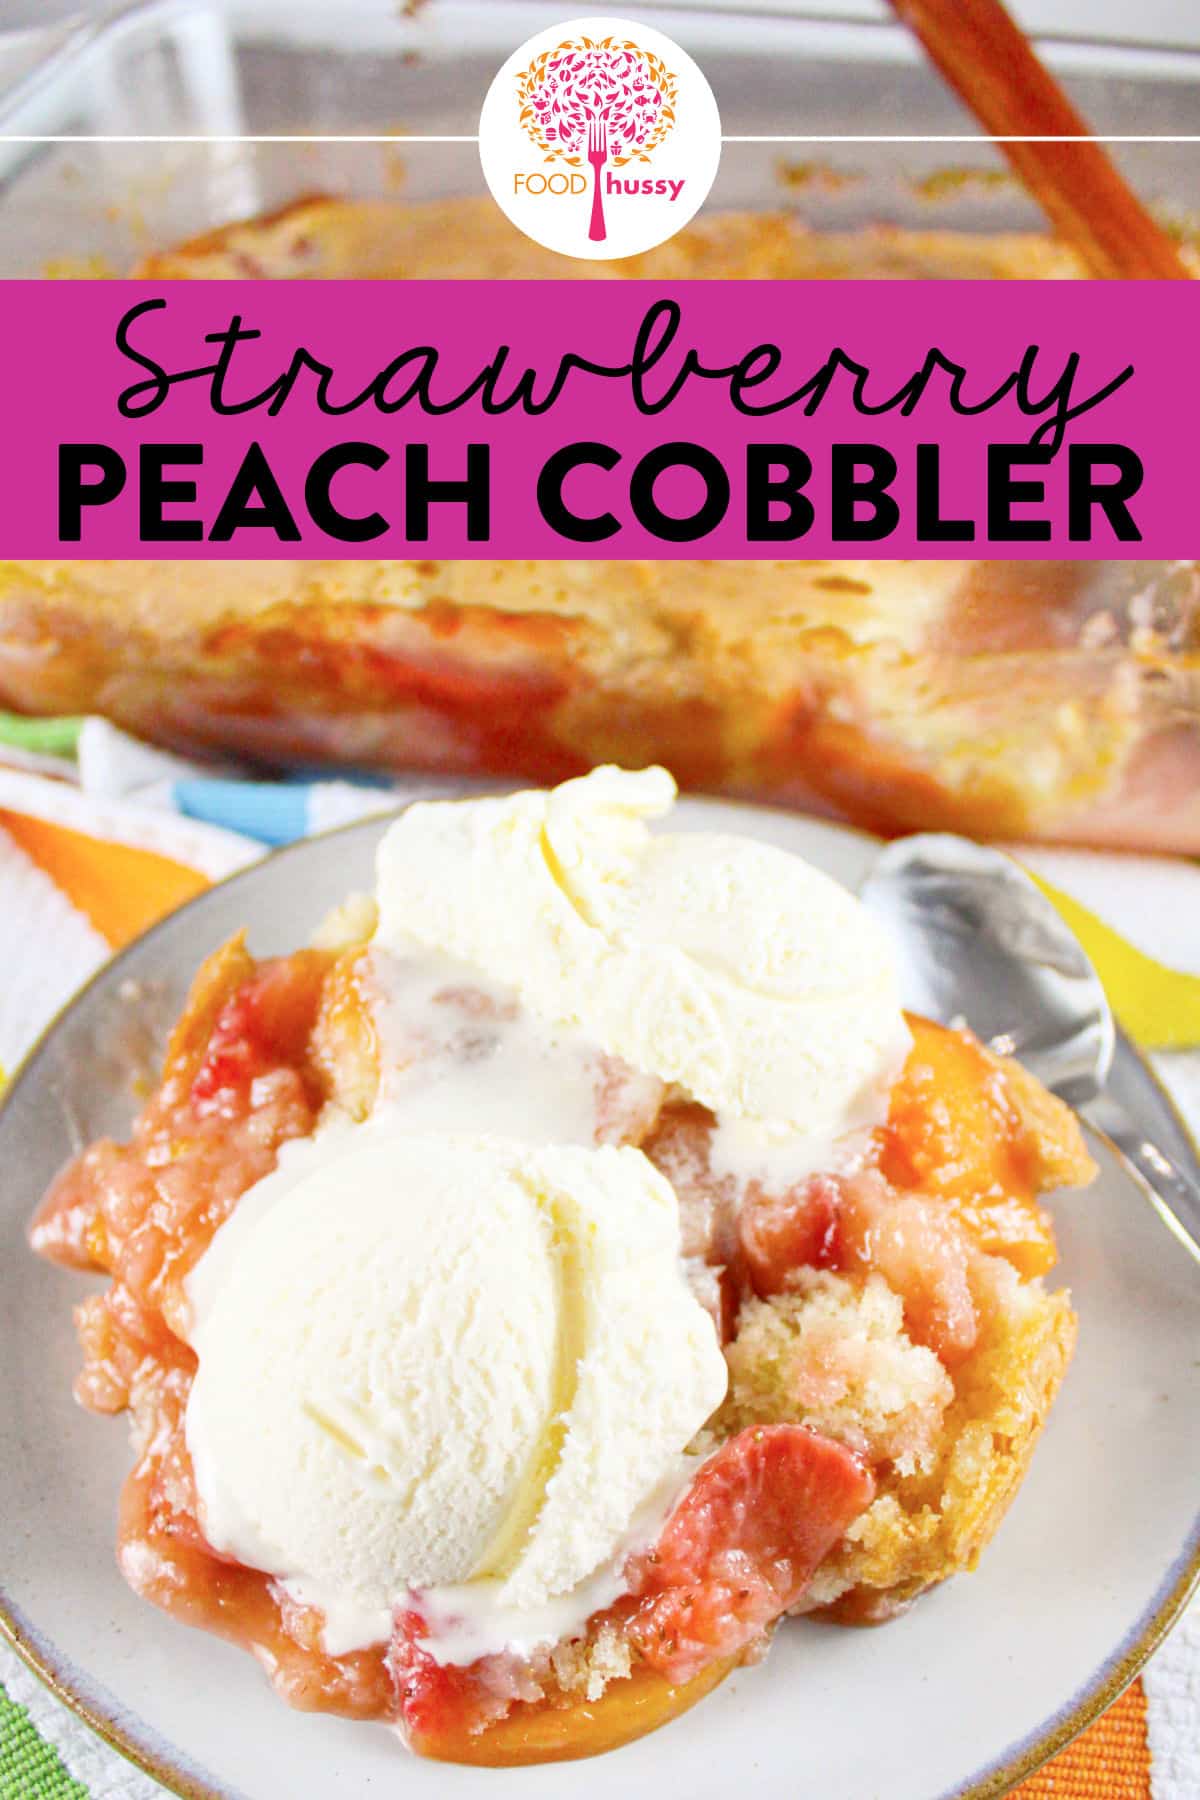 This Magic Strawberry Peach Cobbler is made from my mom's famous cobbler recipe. Chock full of fresh strawberries and frozen ripe peaches topped with a light and fluffy batter. Then - a MAGIC sugary crust to top it all off! Don't forget the ice cream! via @foodhussy